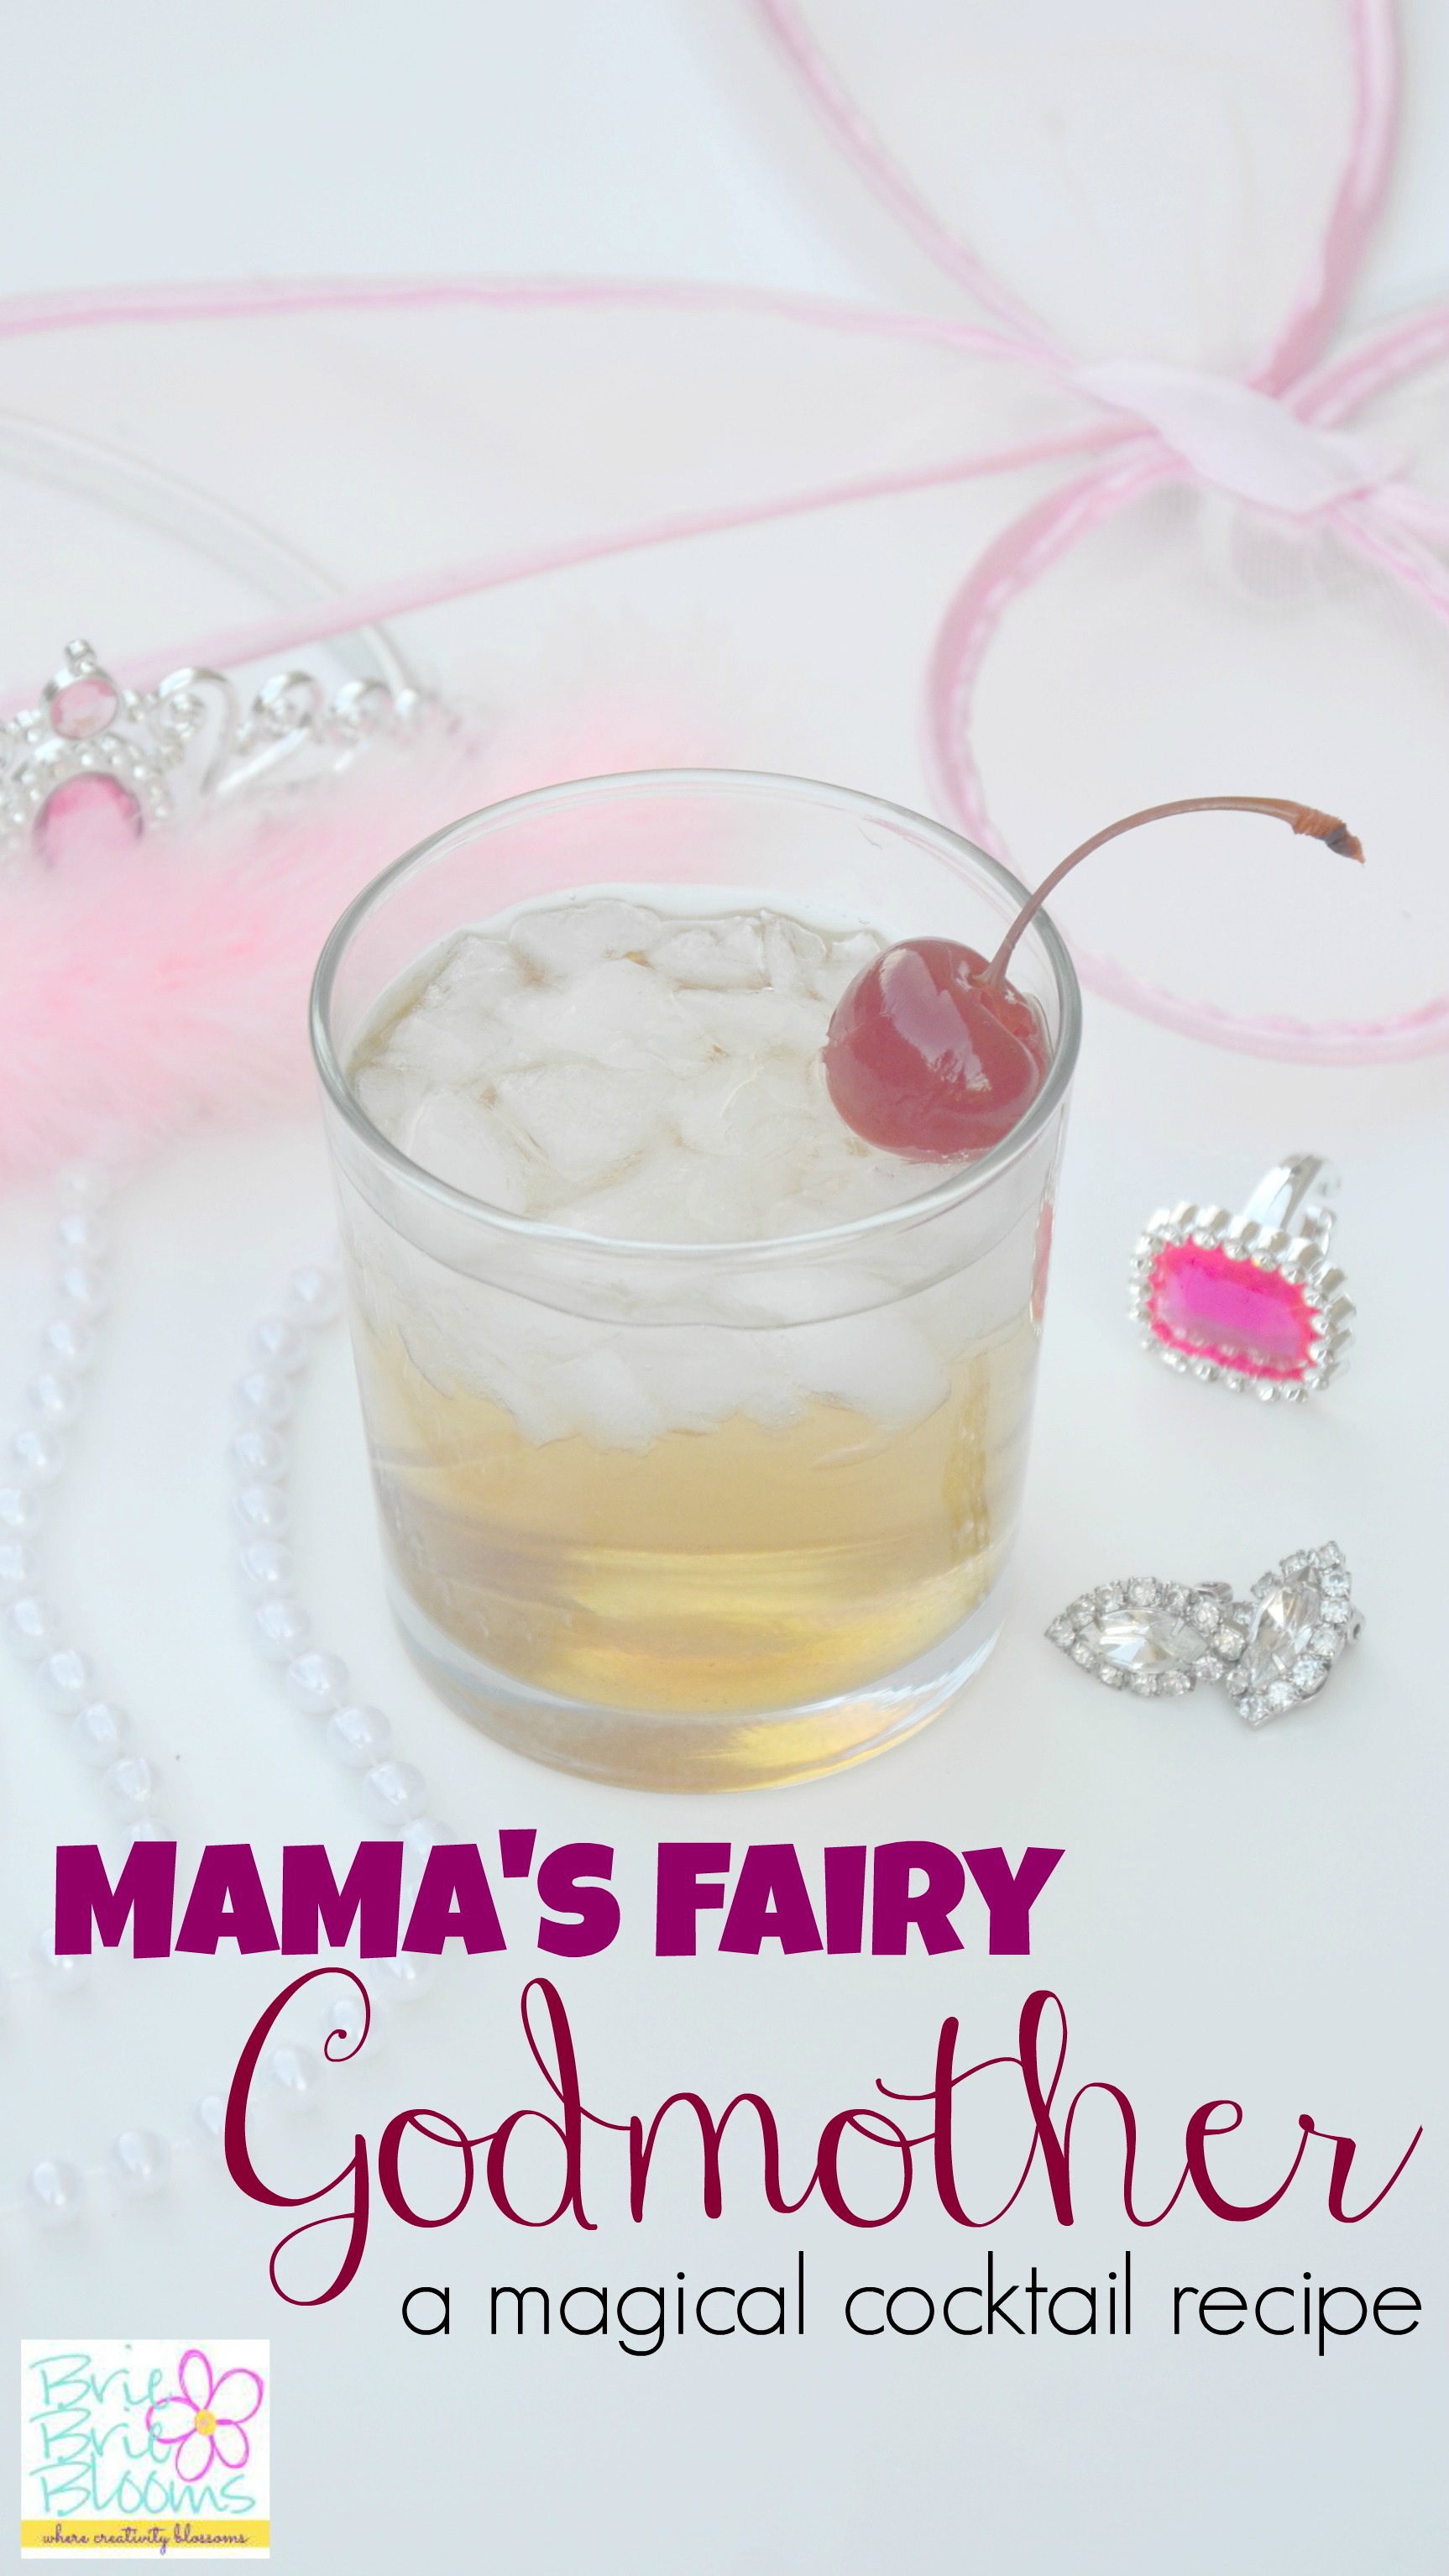 Mama's Fairy Godmother cocktail recipe